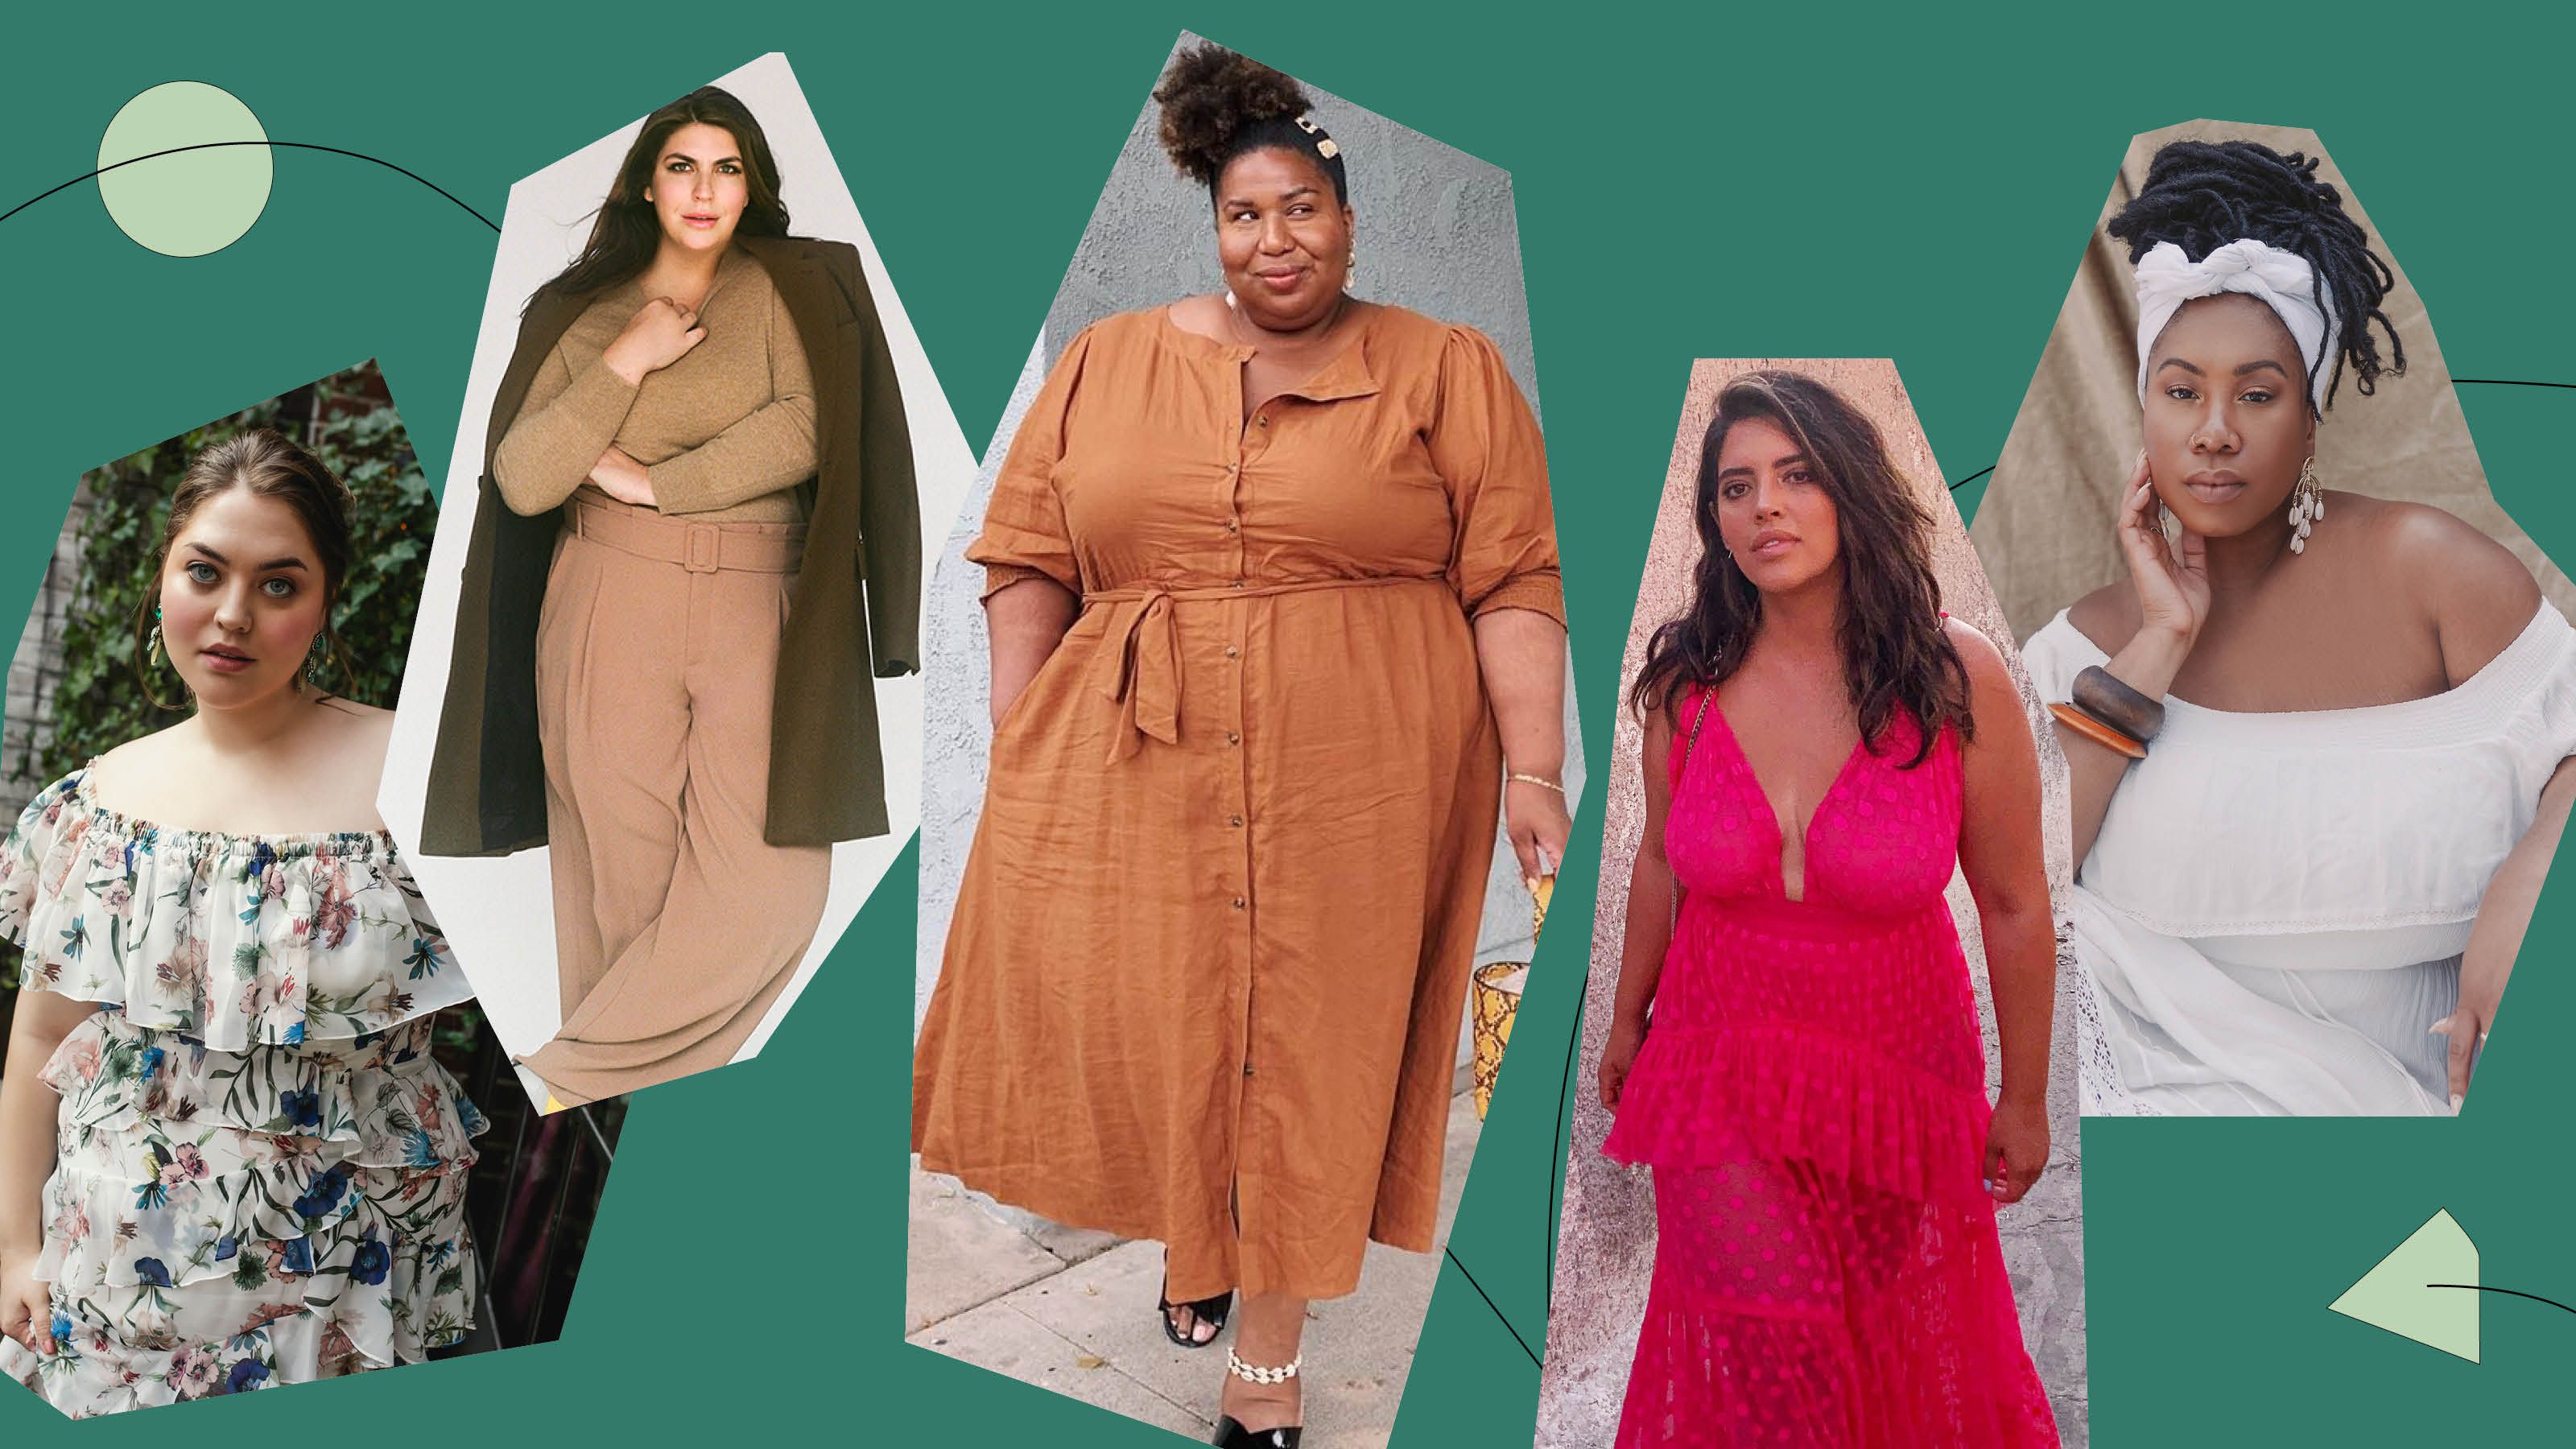 The Fashion Industry Has A Plus Size Problem. These Women Want To